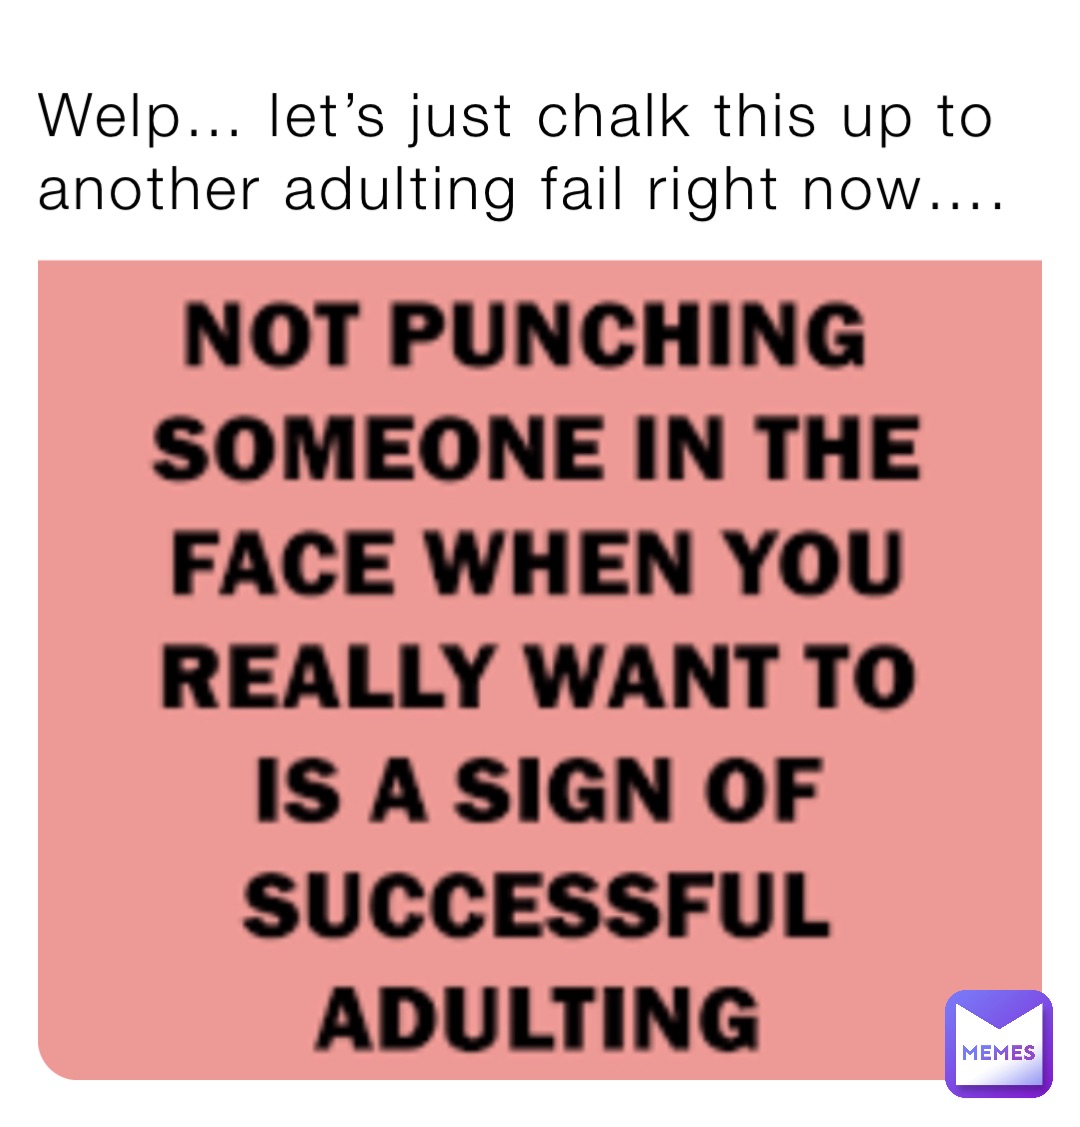 Welp… let’s just chalk this up to another adulting fail right now….